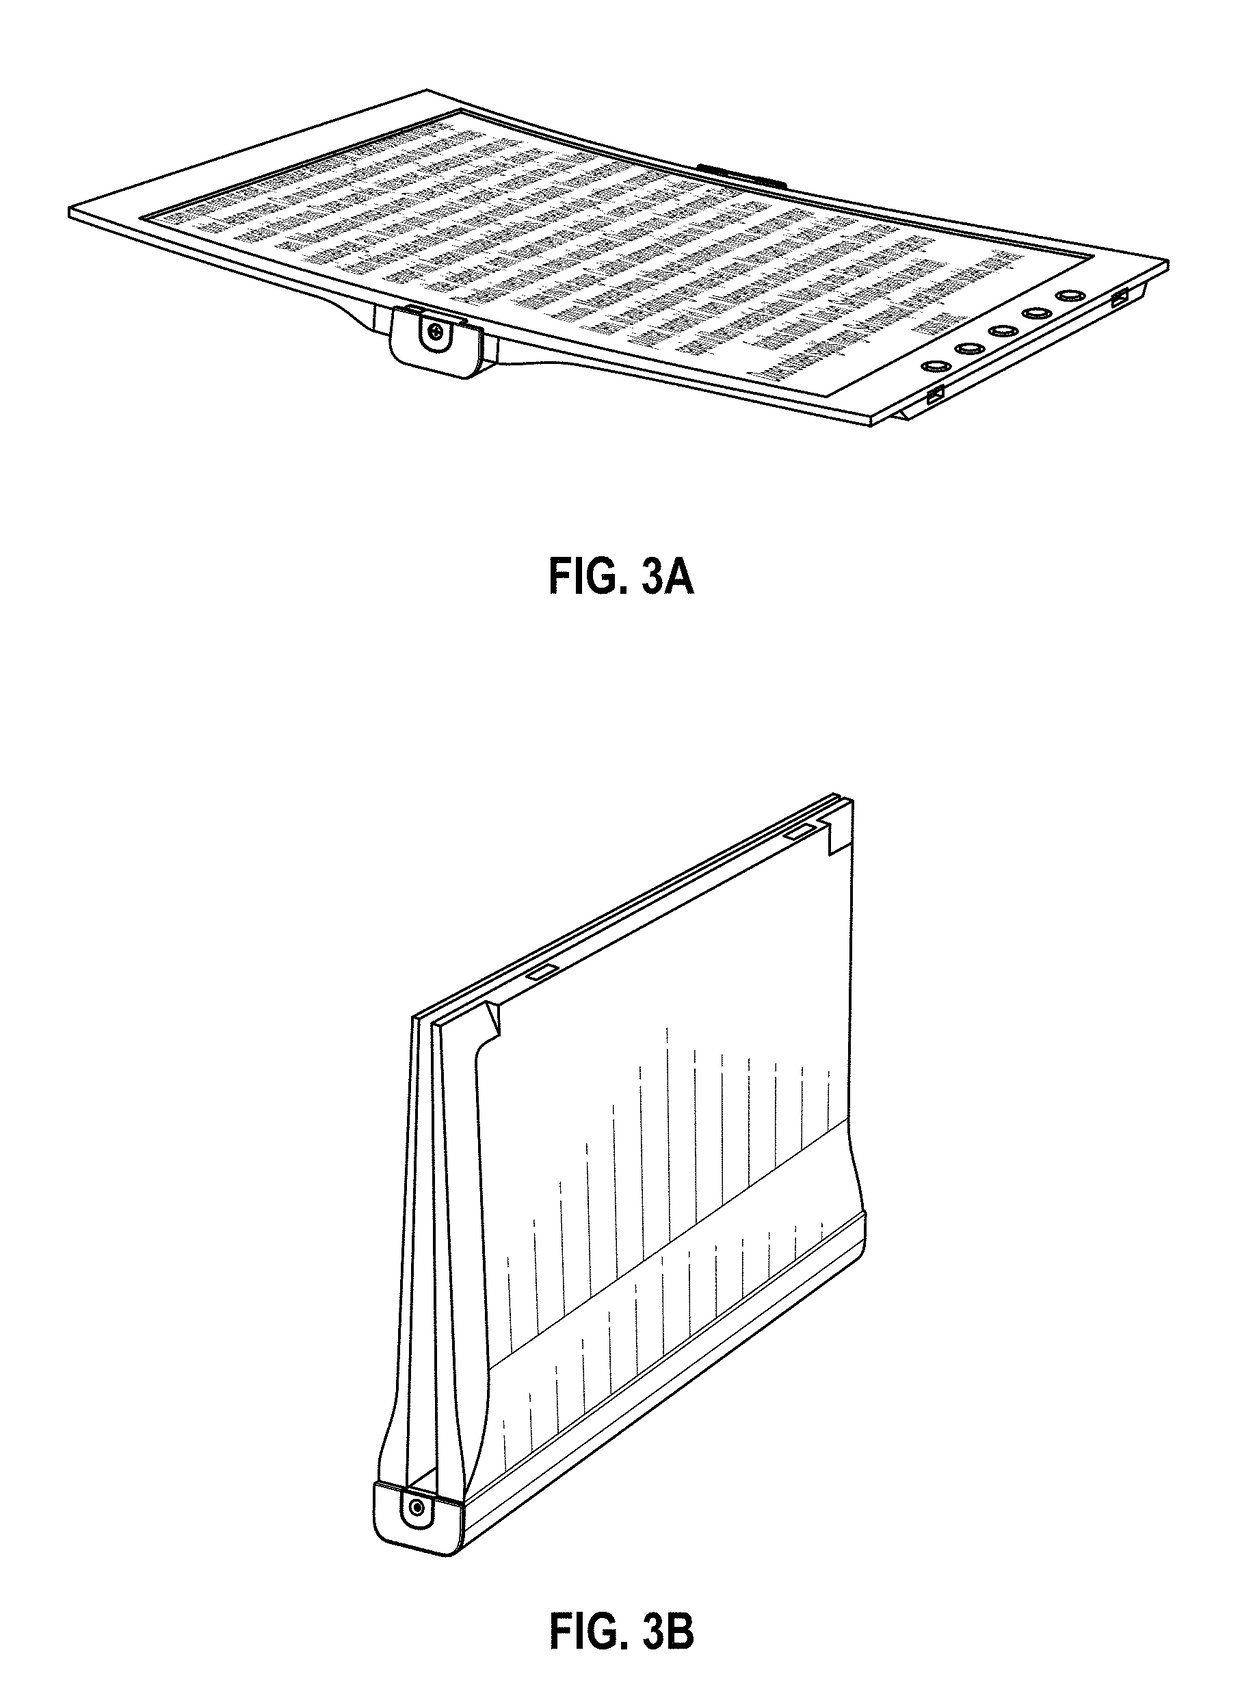 Foldable electro-optic display including digitization and touch sensing